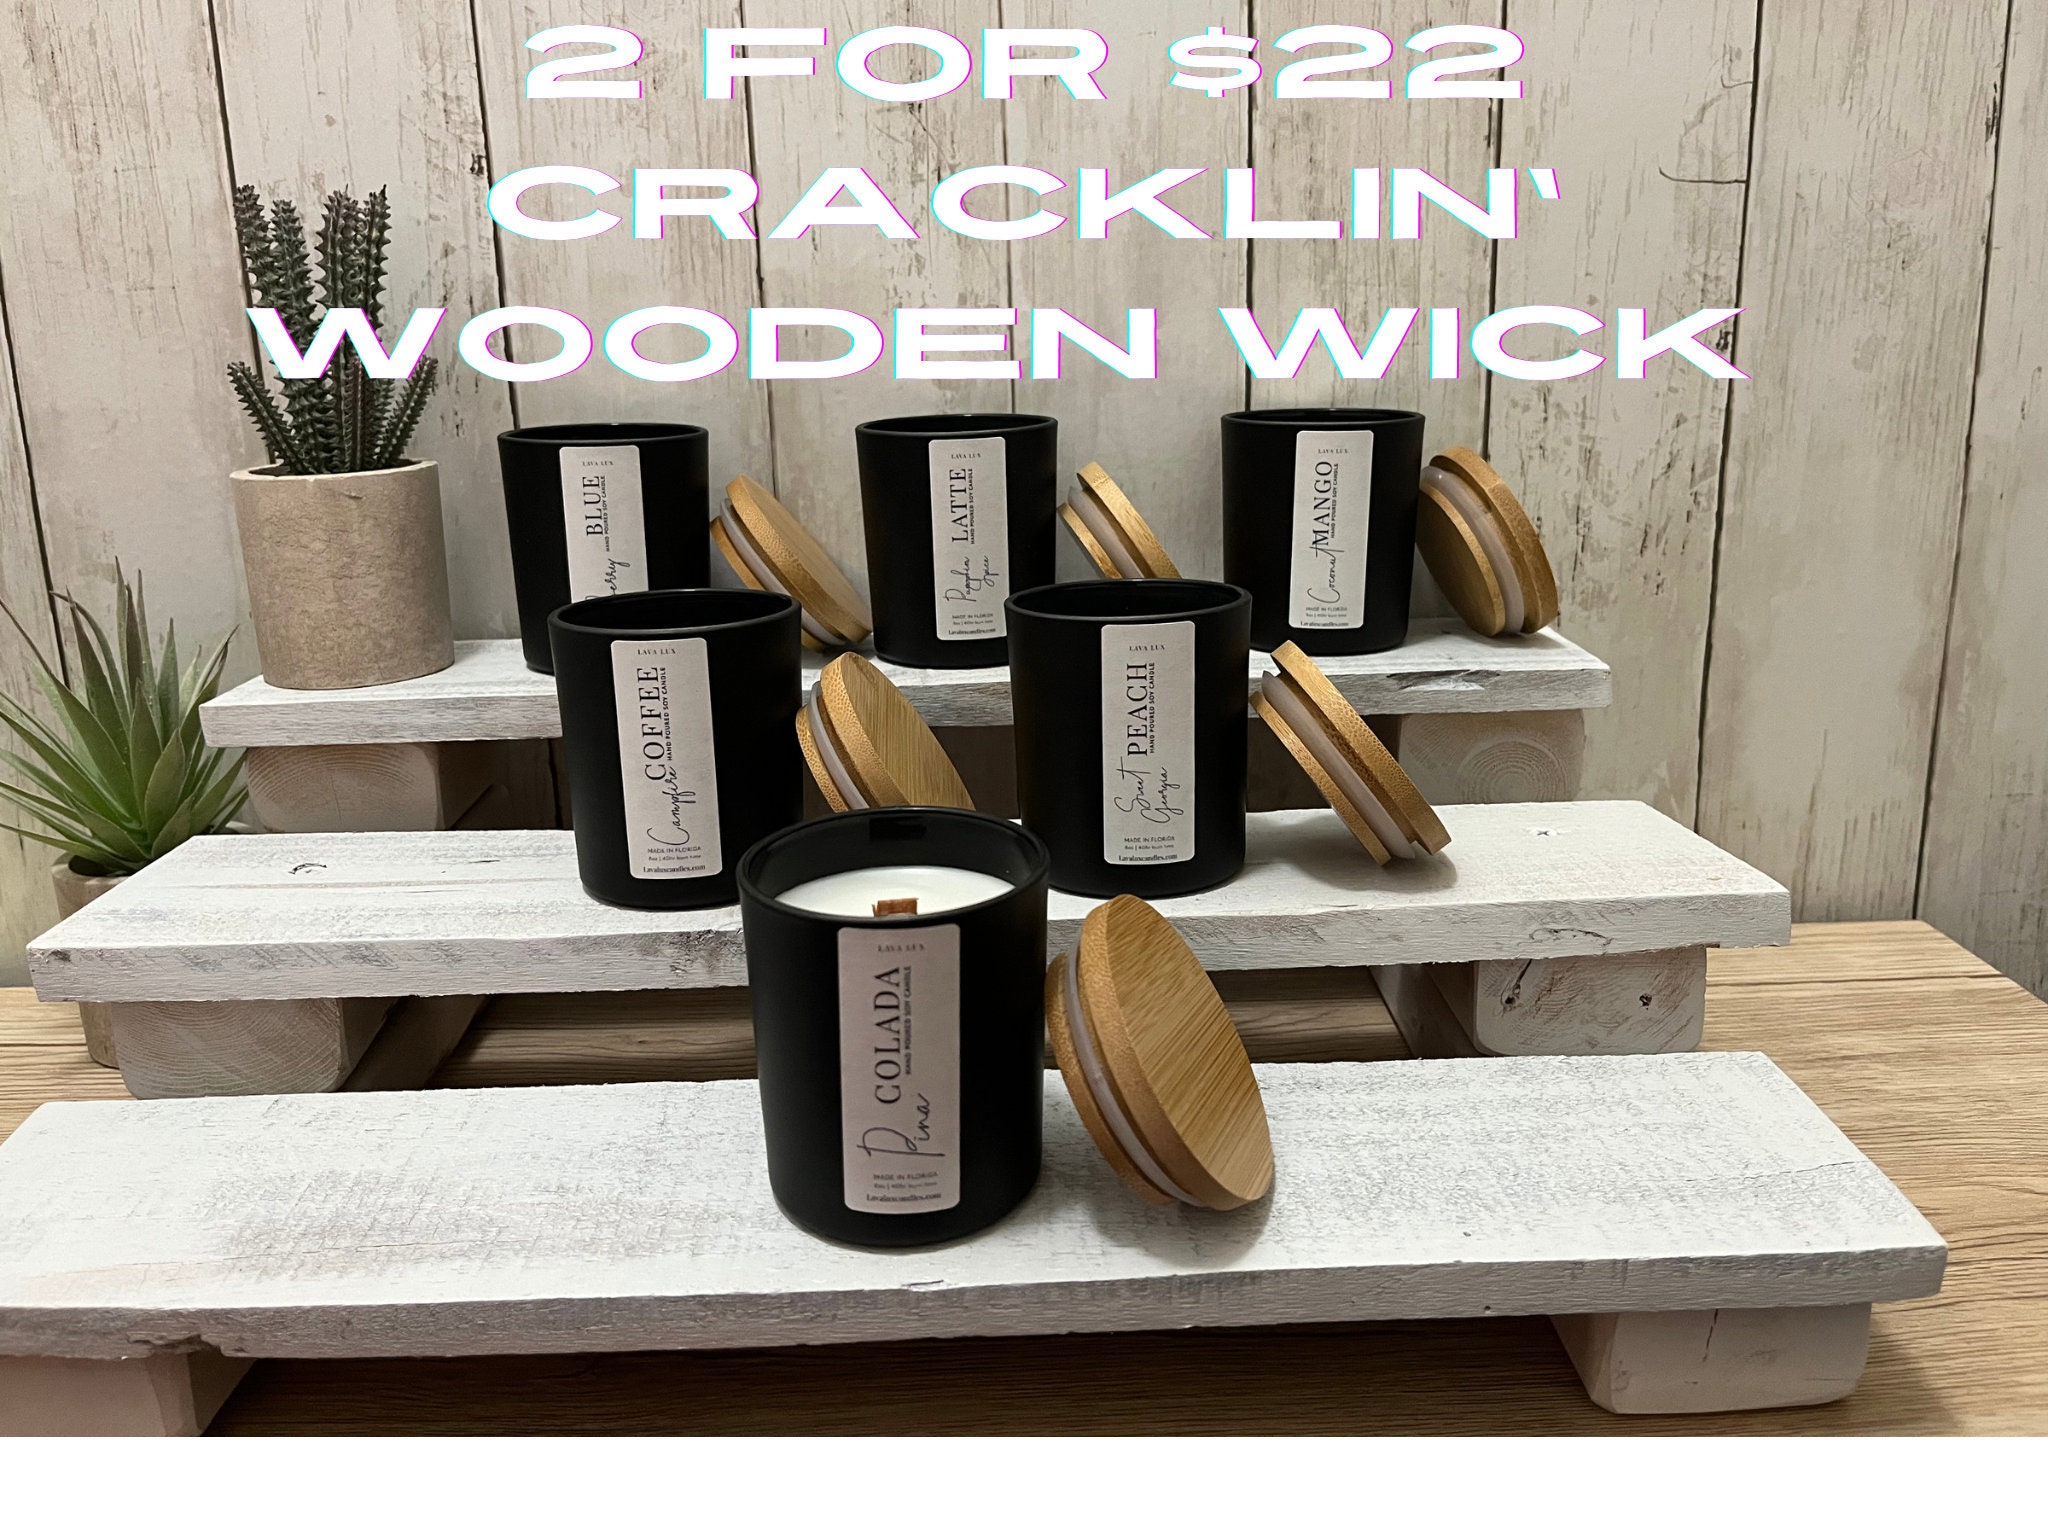 8 Wooden Wicks 16 Pcs 8 Steel Bottom Pre-soaked With Fully Refined